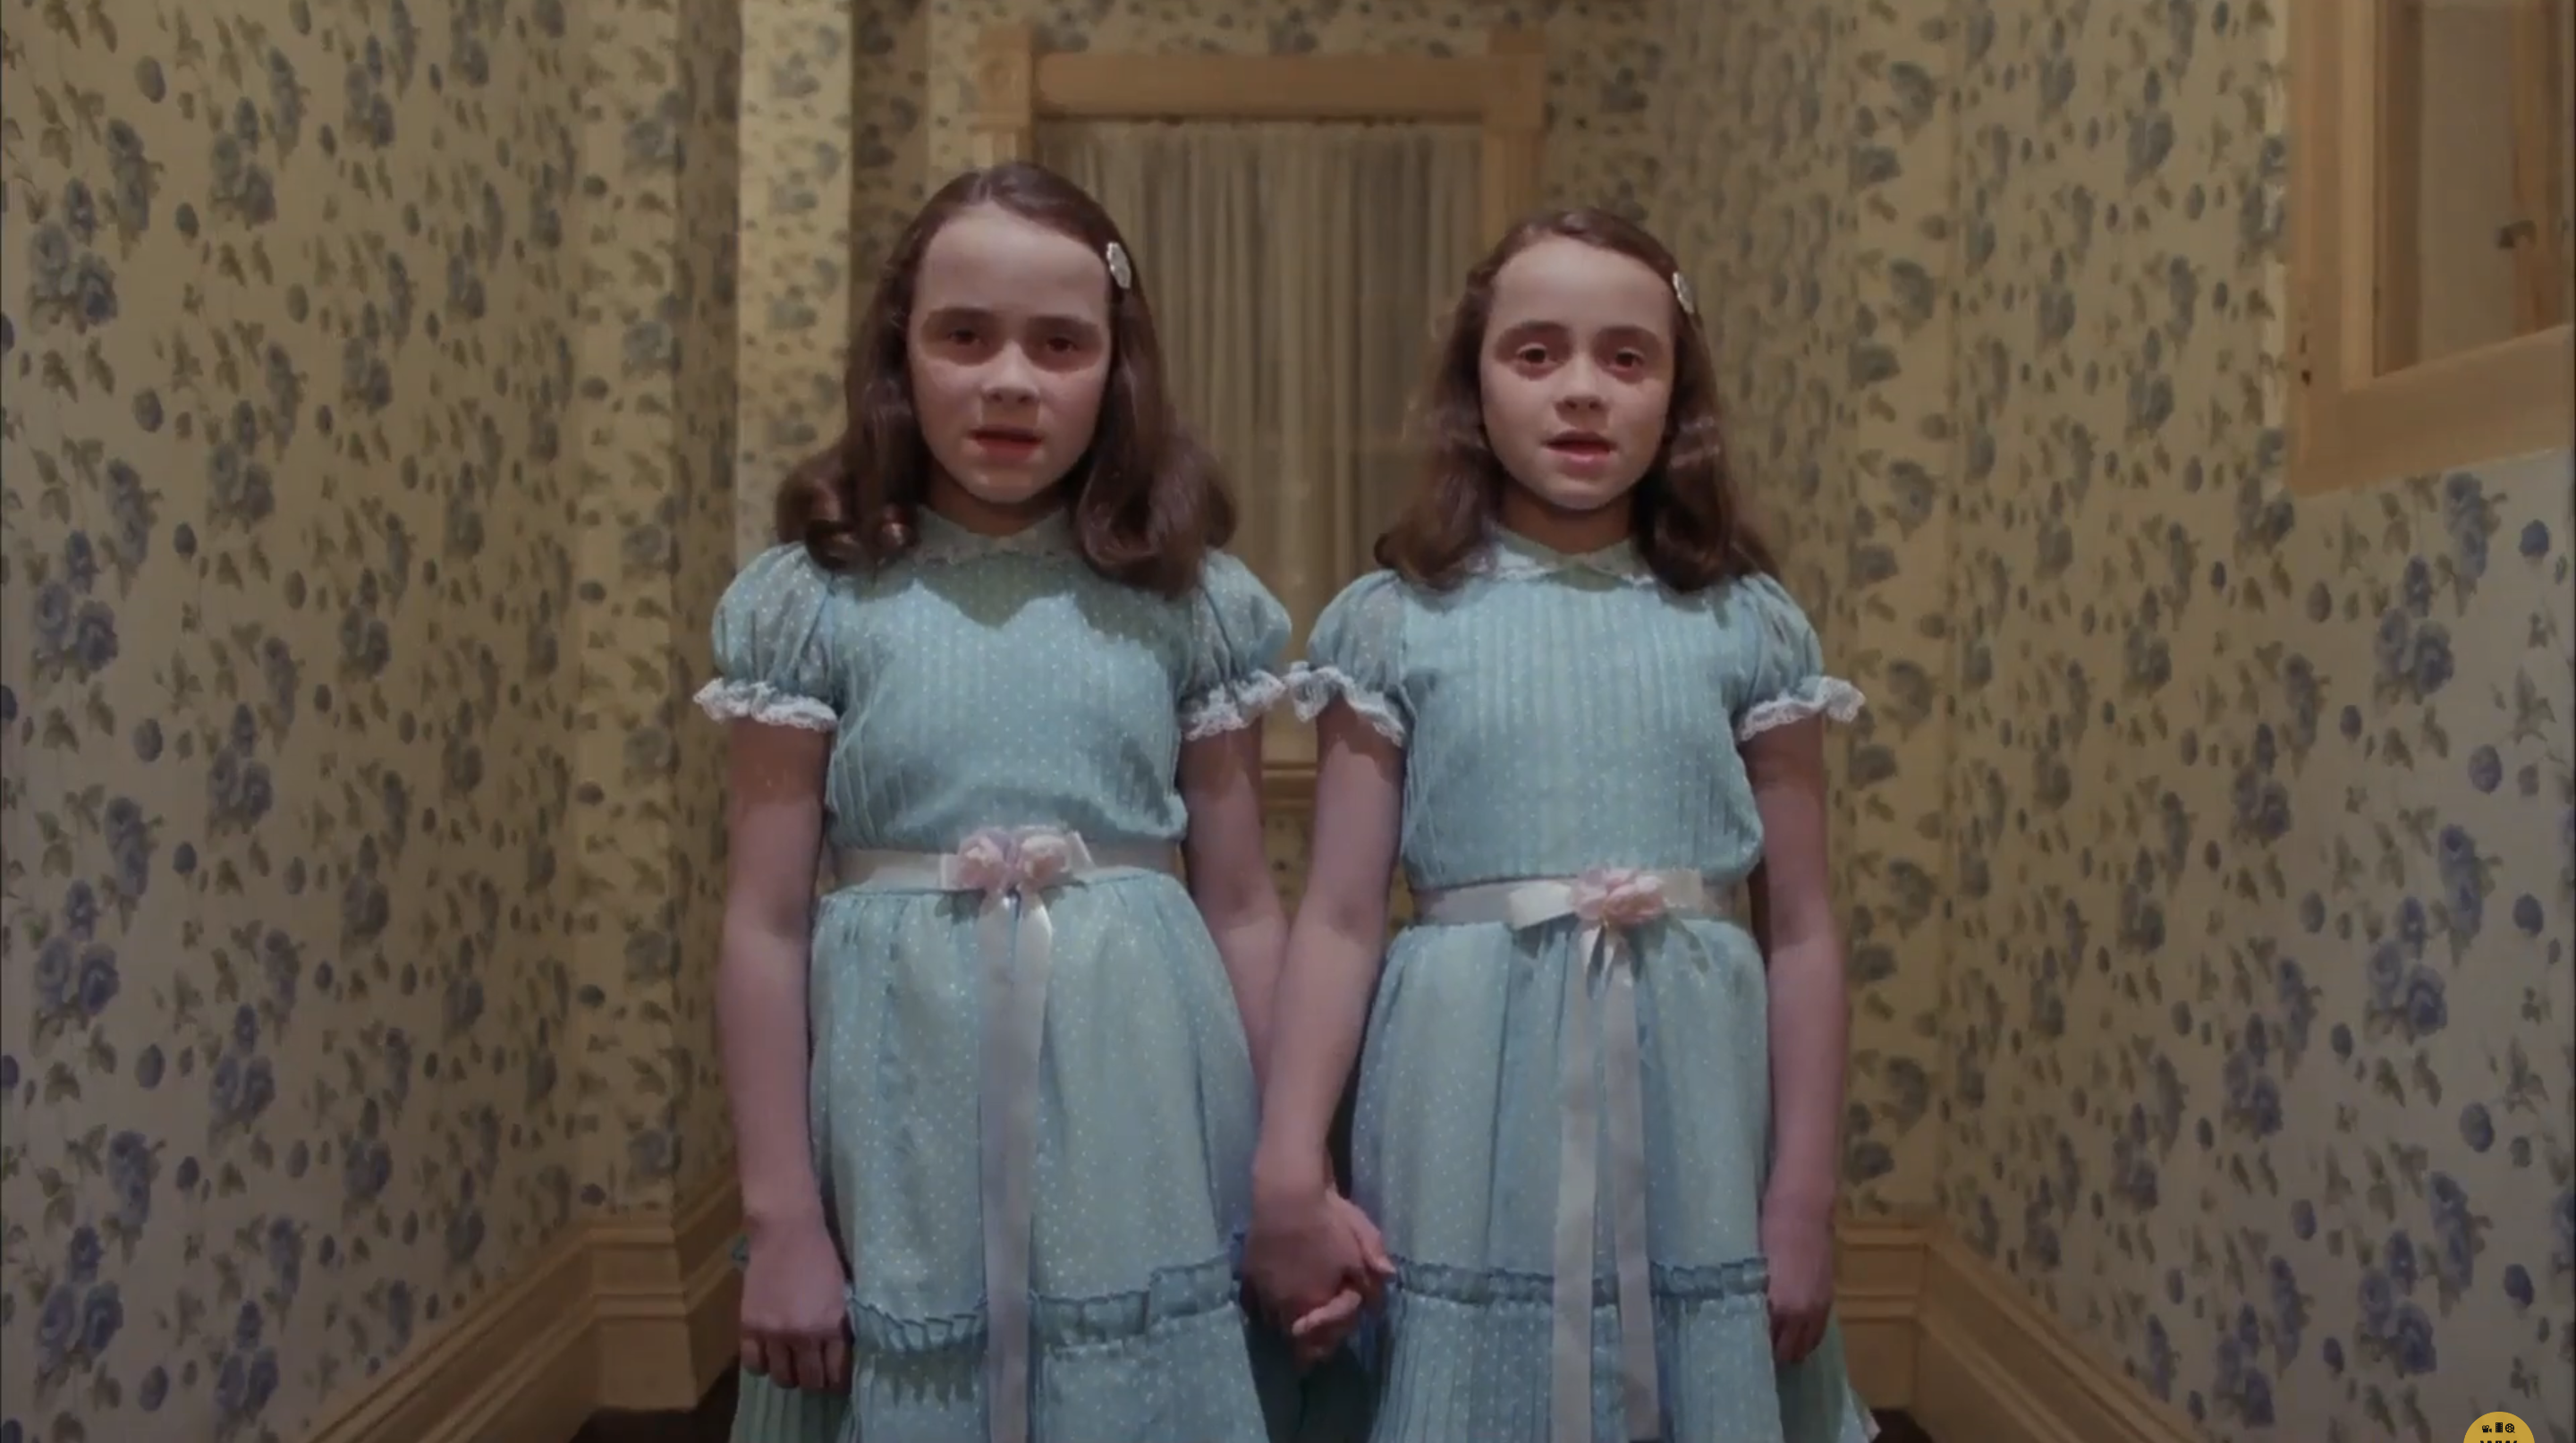 The twins from &quot;The Shining.&quot;